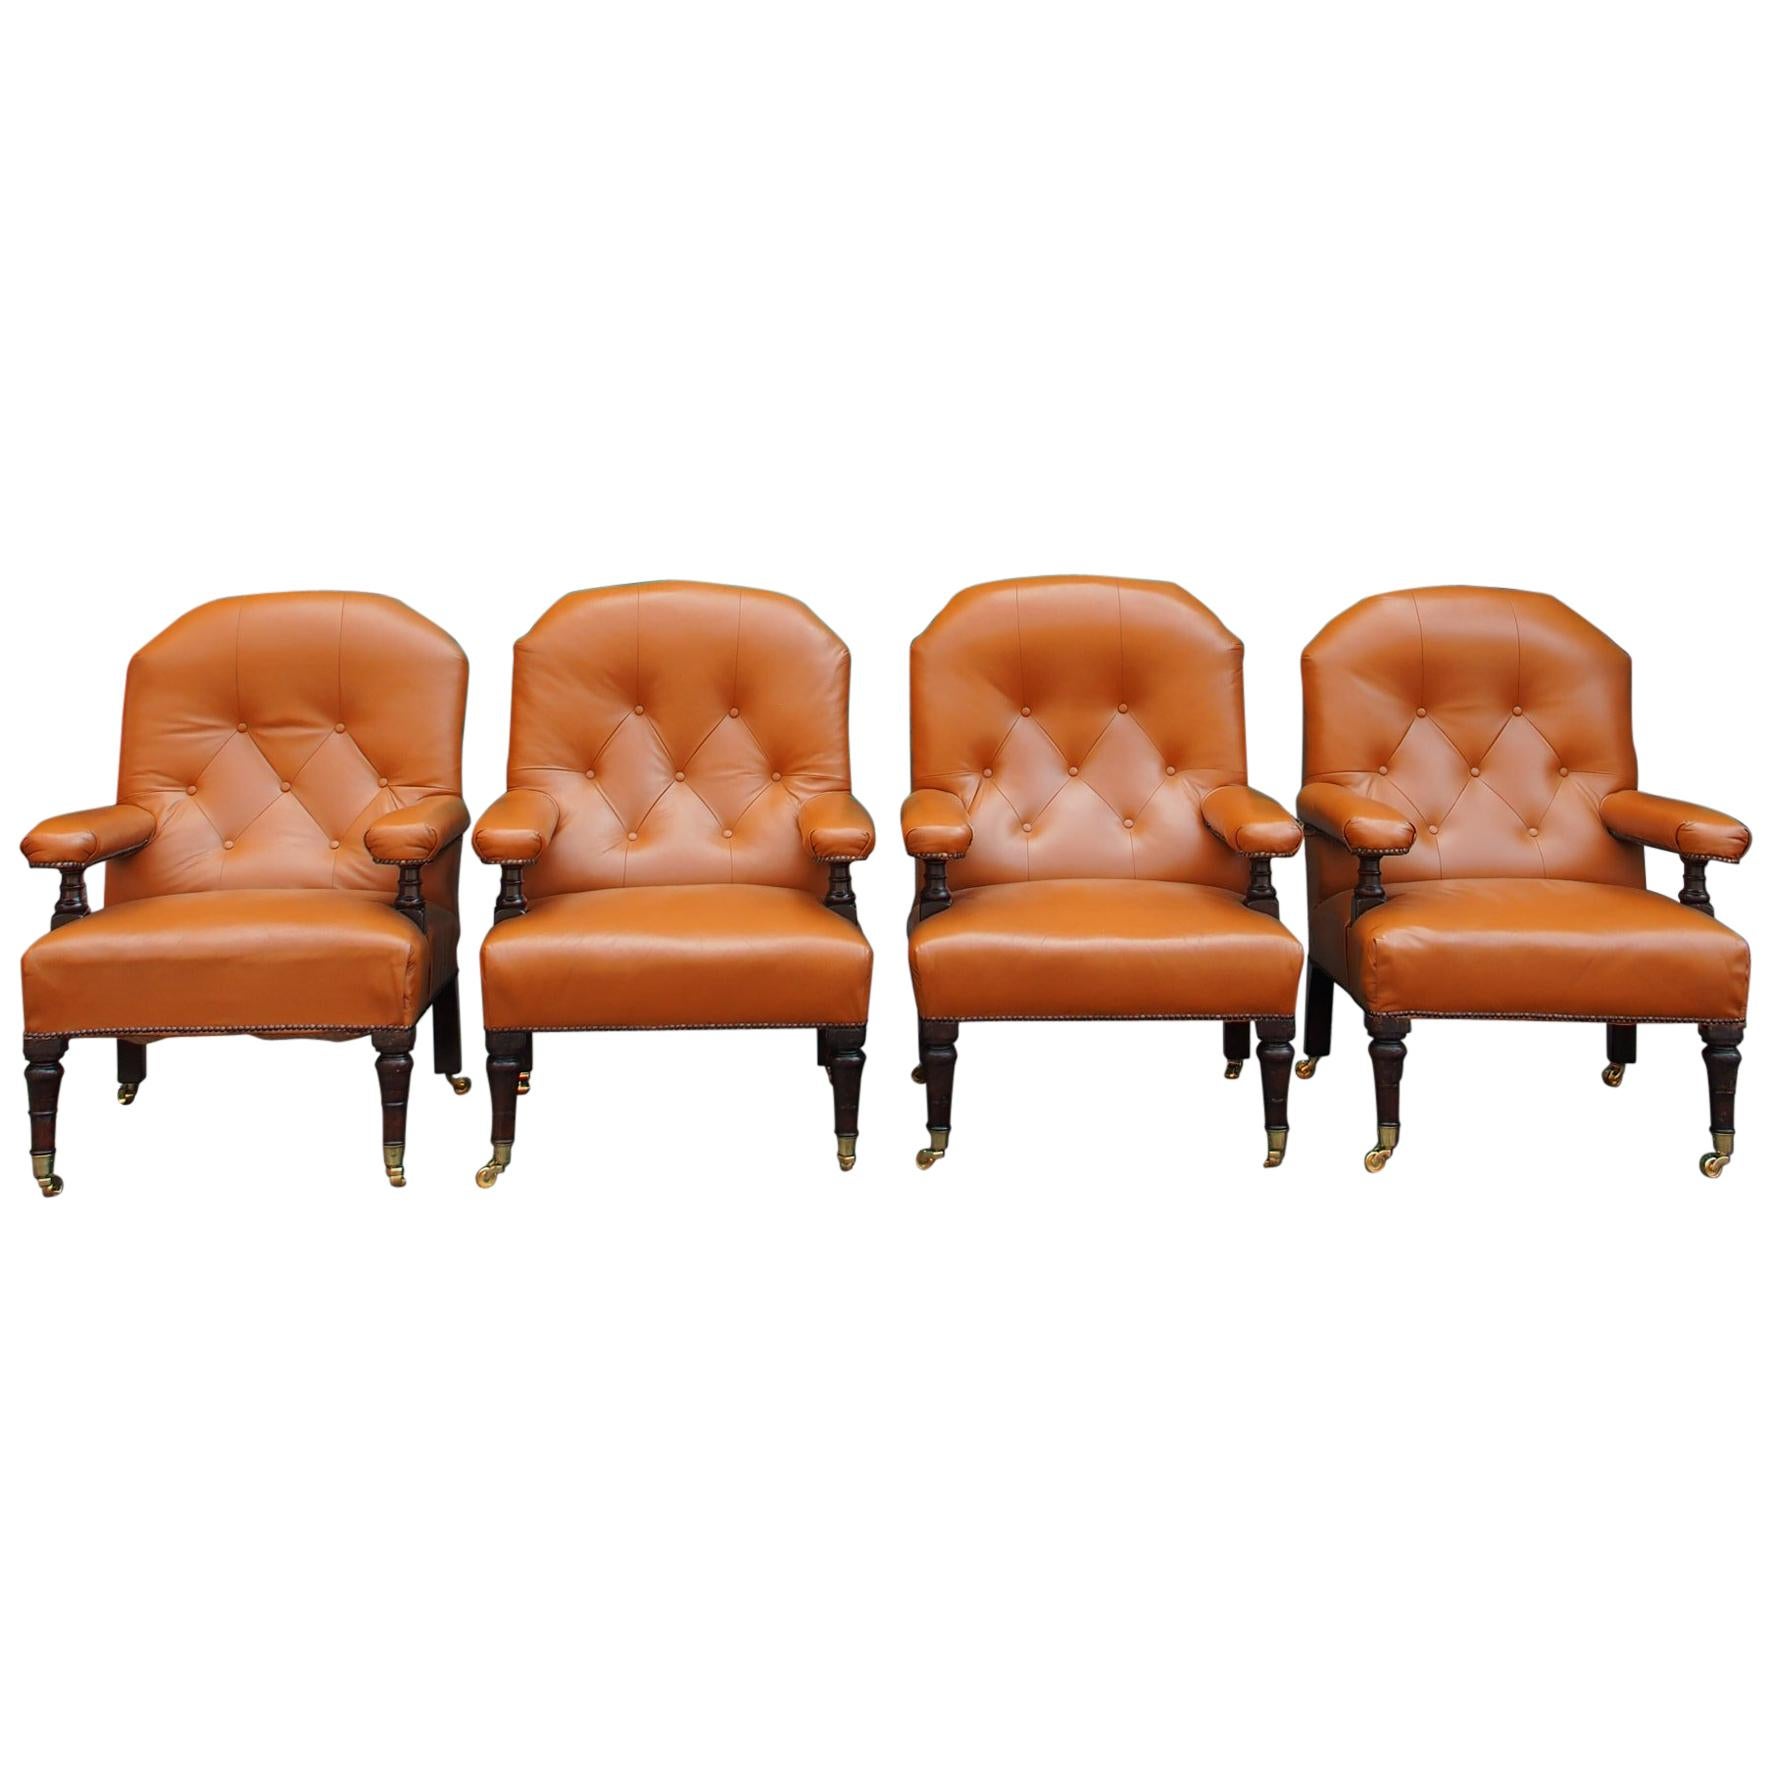 Set of 4 Mahogany and Tan Leather Library Chairs For Sale